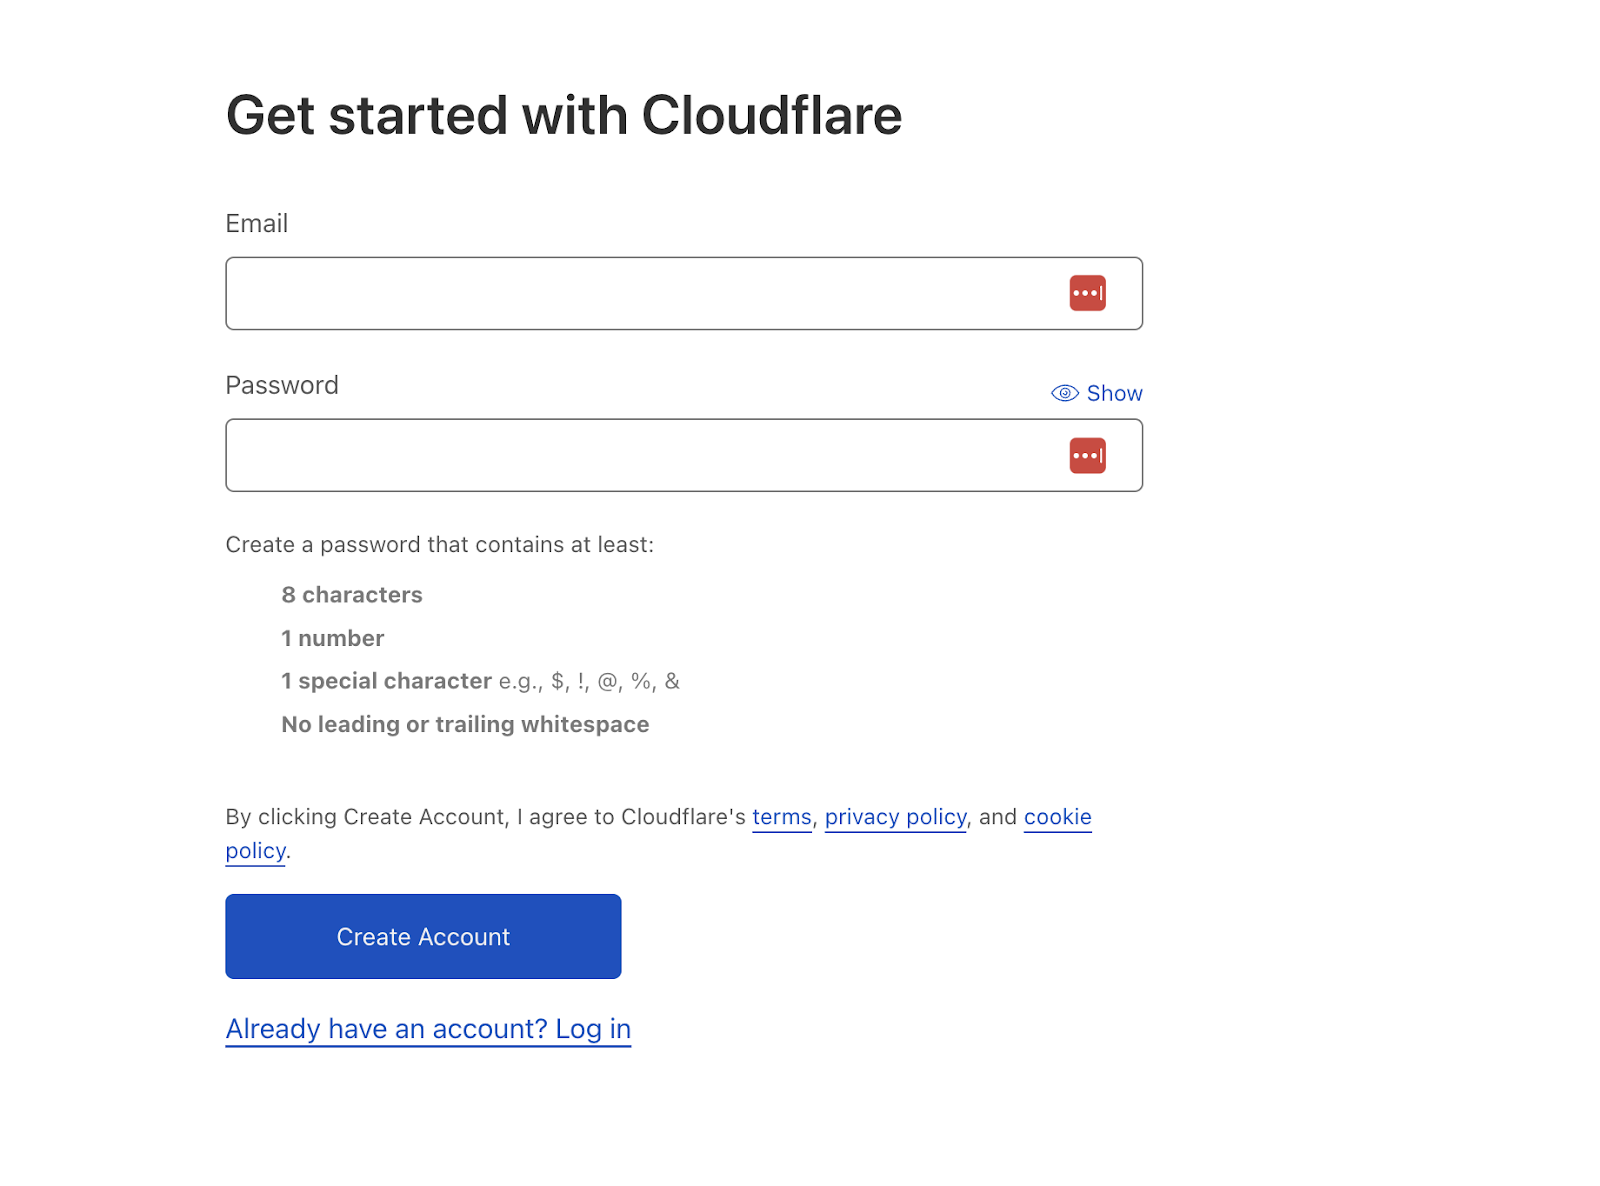 Cloudflare signup form